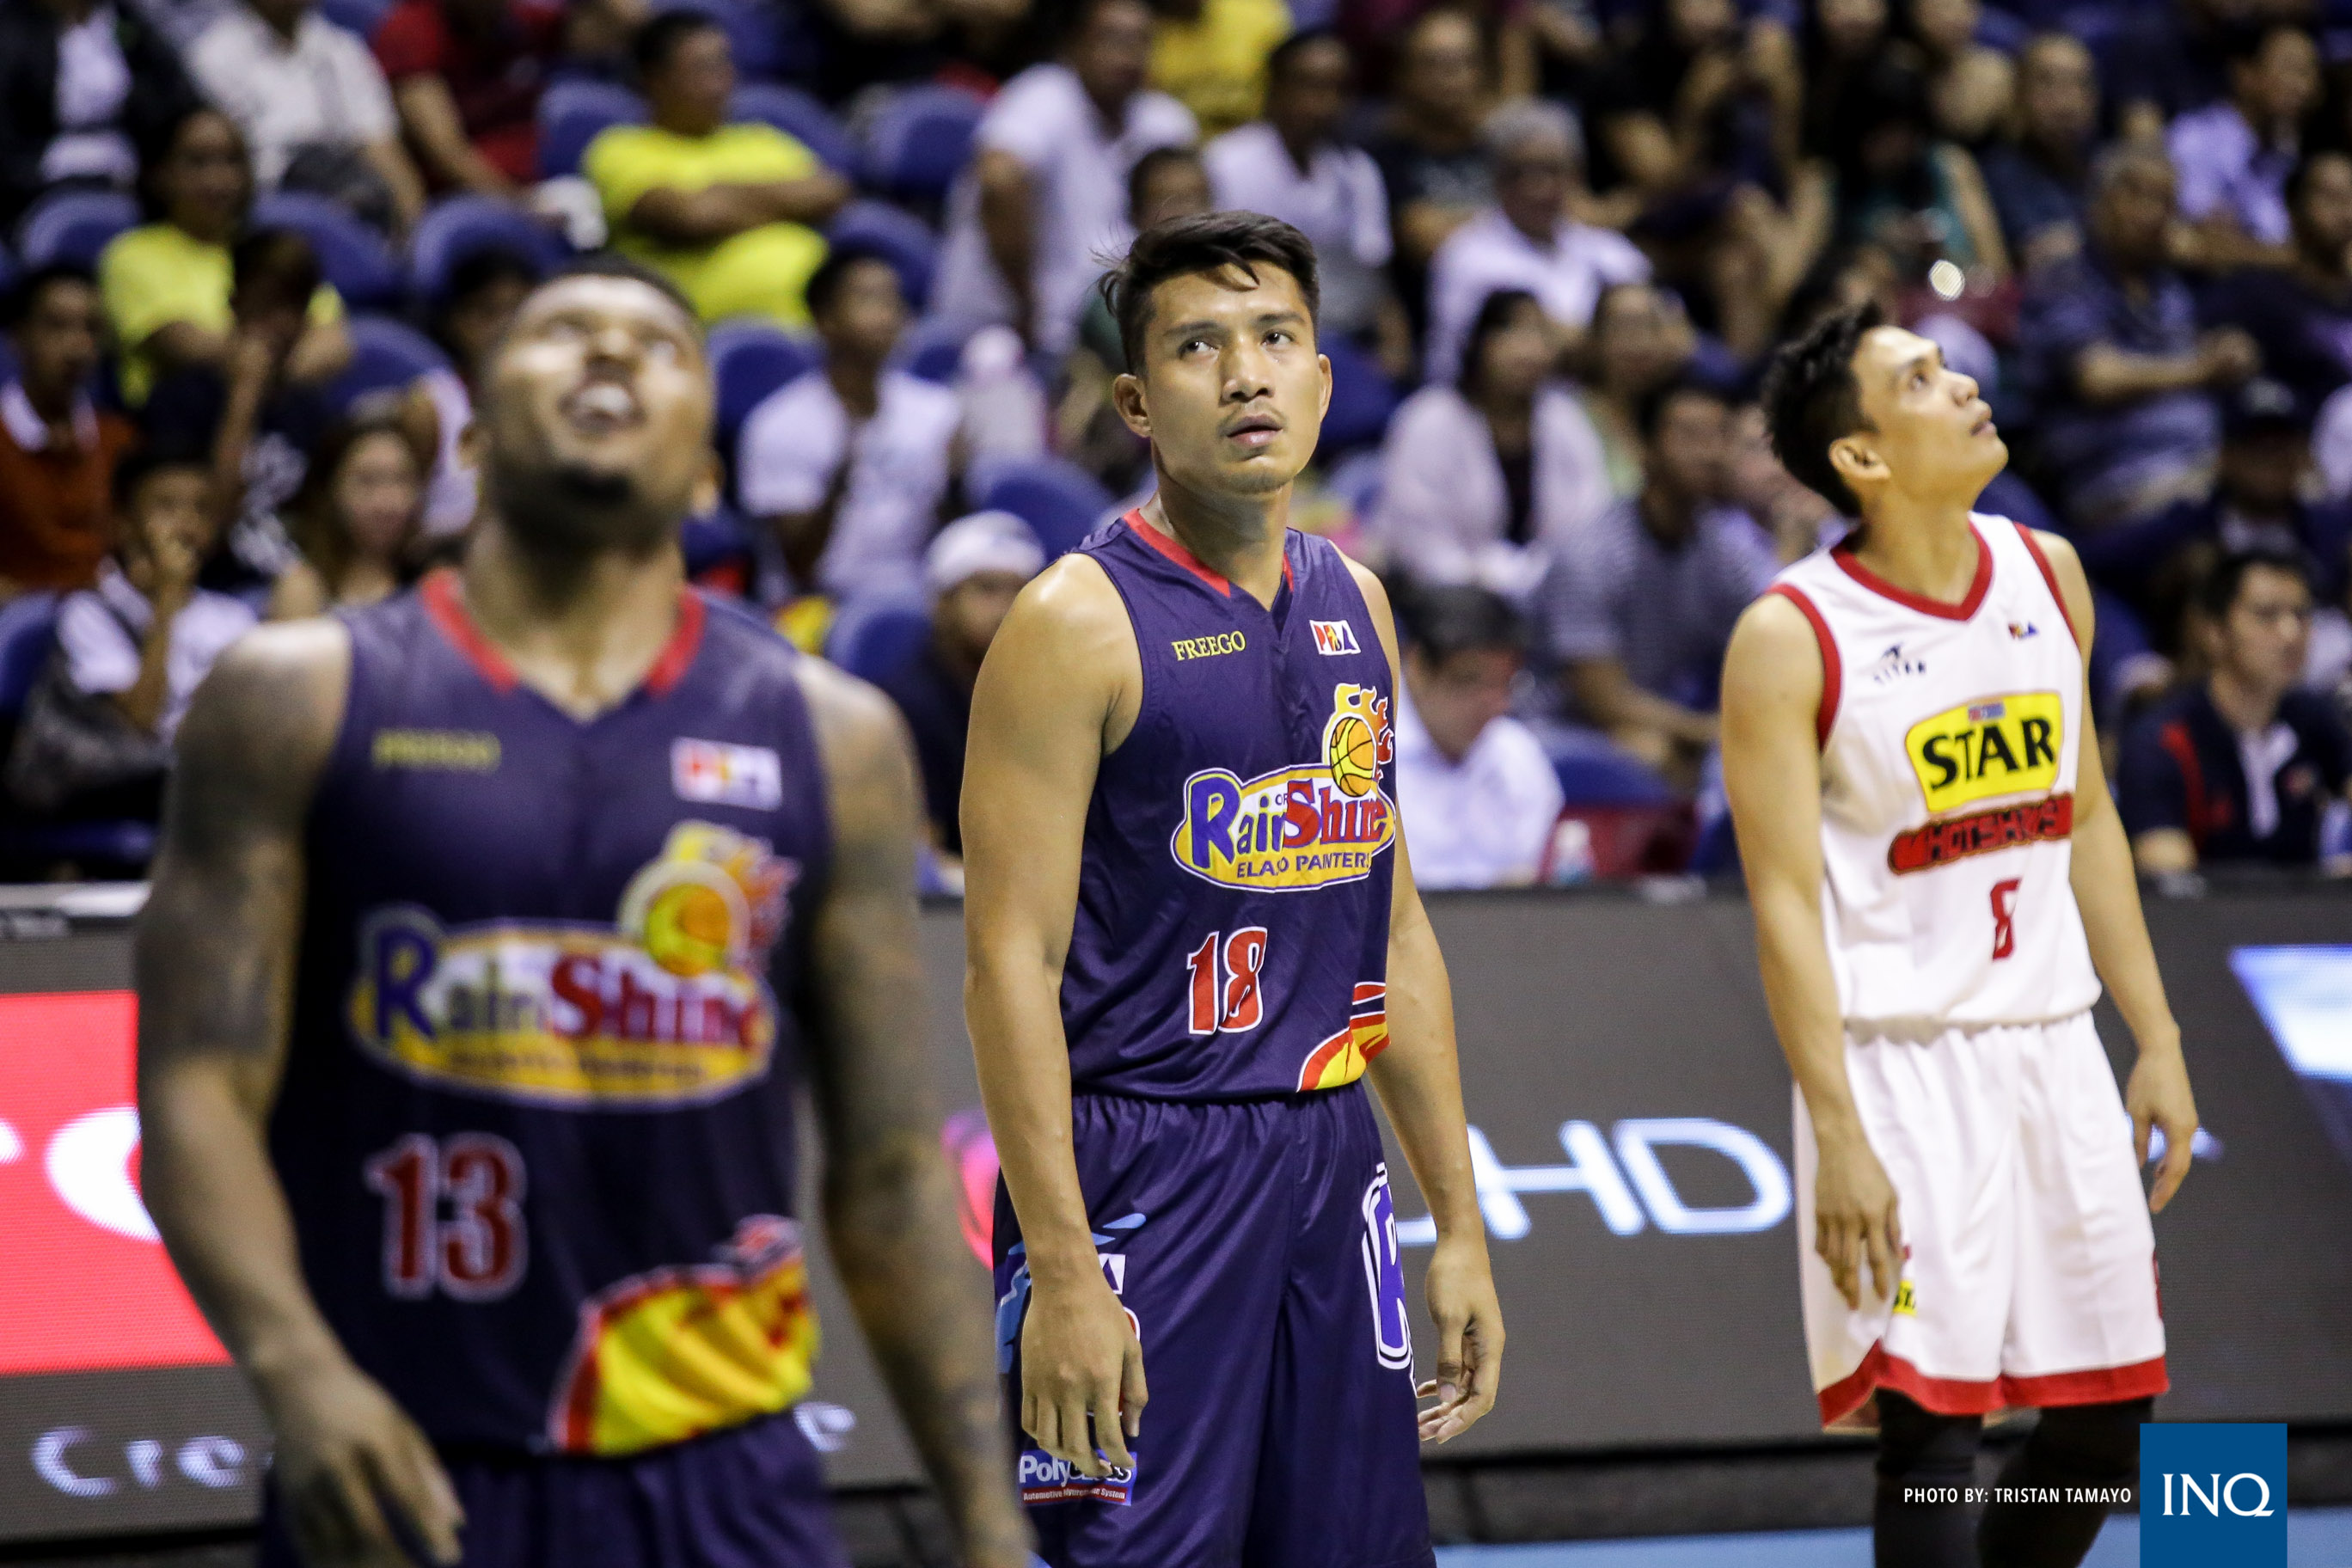 Three points away from 10k, Yap rues missed 3-pointer in ROS loss